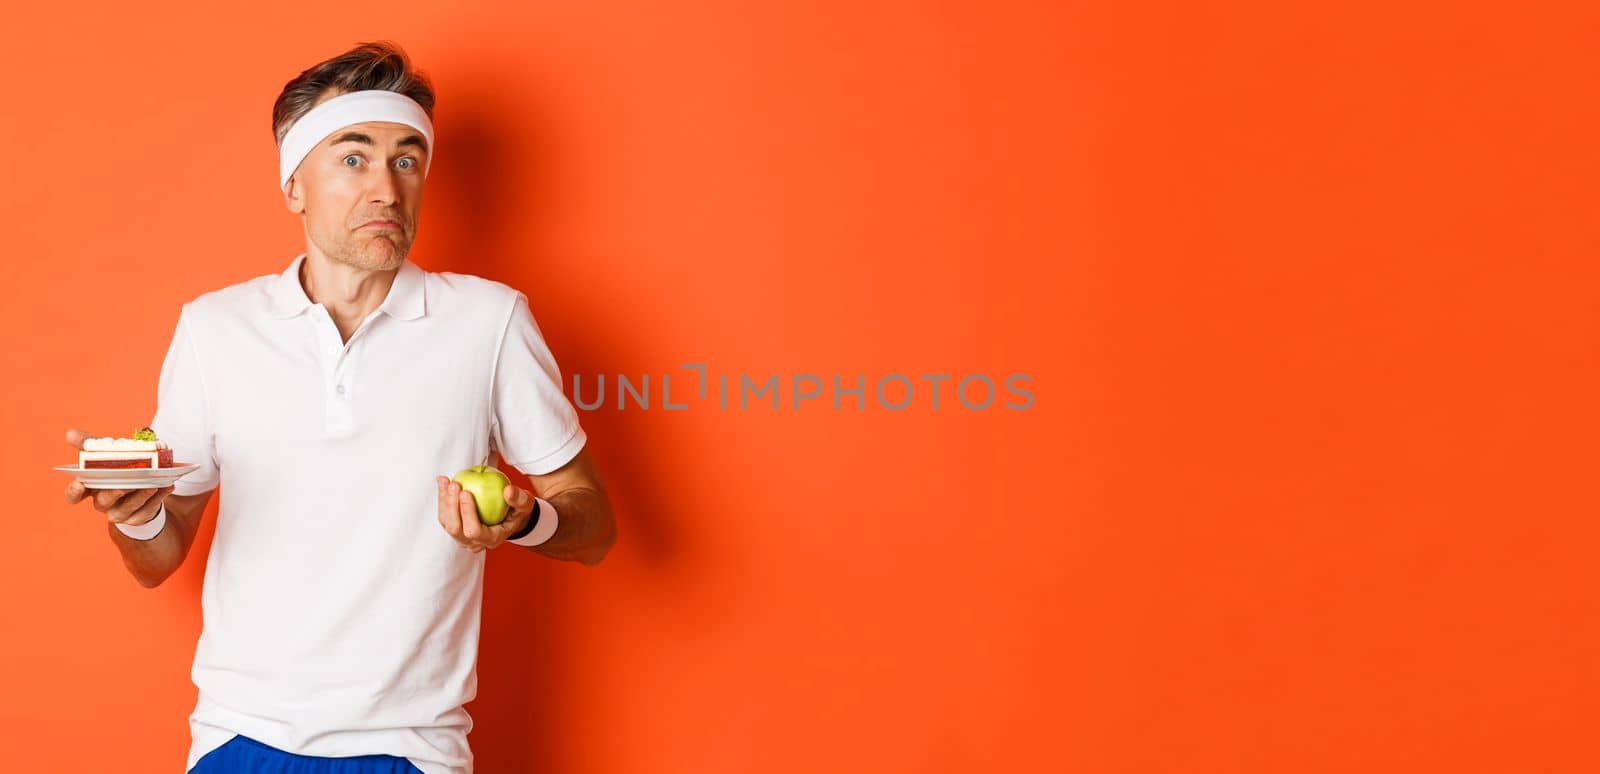 Image of clueless middle-aged fitness guy, holding apple and cake, shrugging shoulders, standing in workout uniform over orange background.